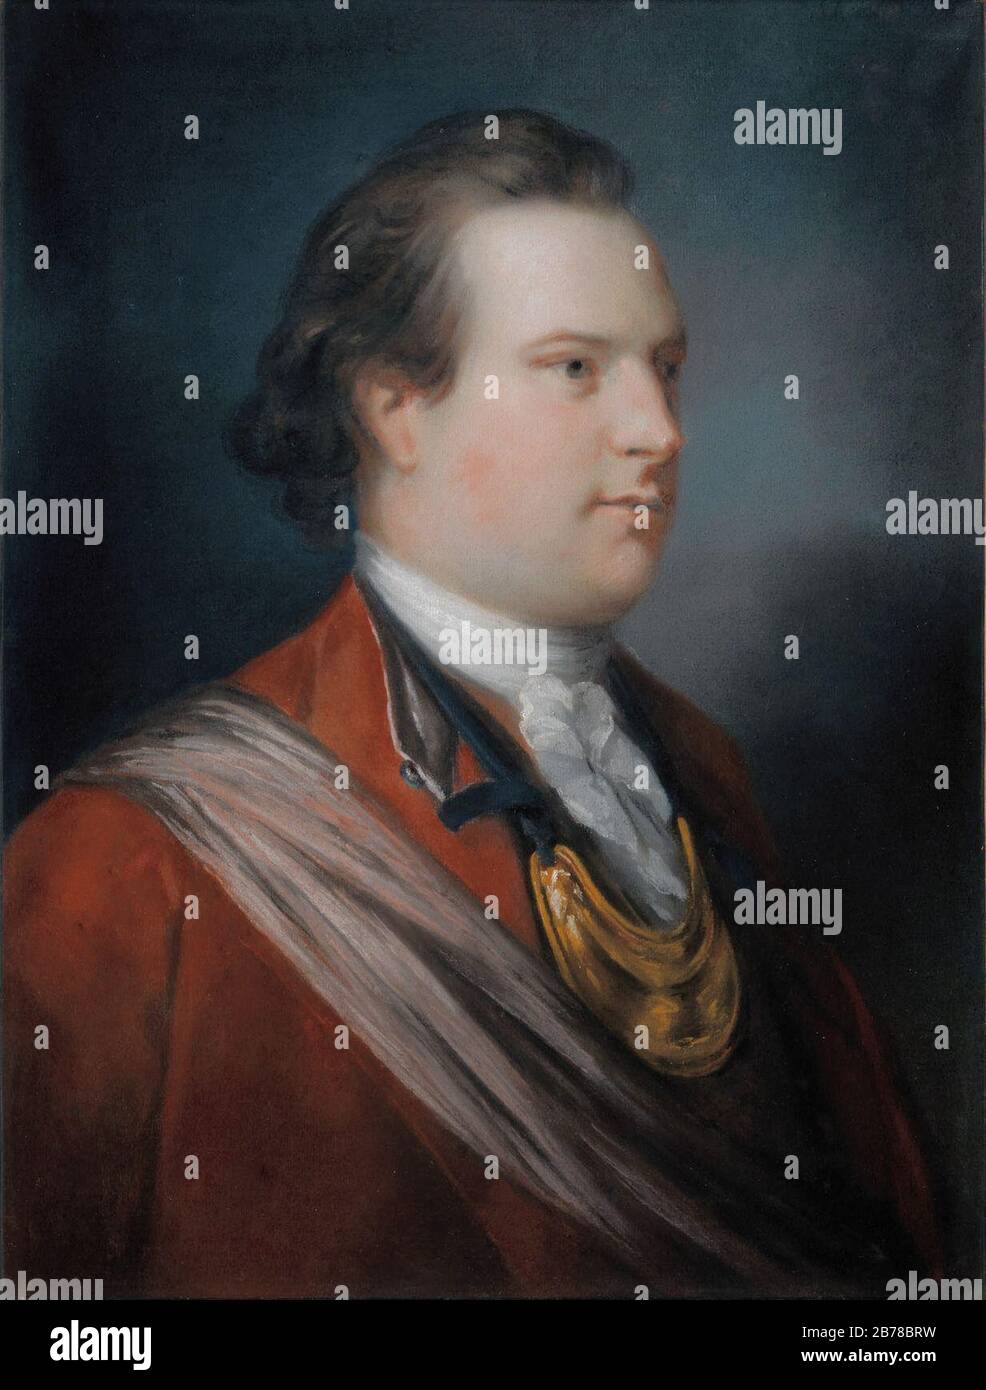 George Keppel, 3rd Earl of Albemarle, by Francis Cotes. Stock Photo